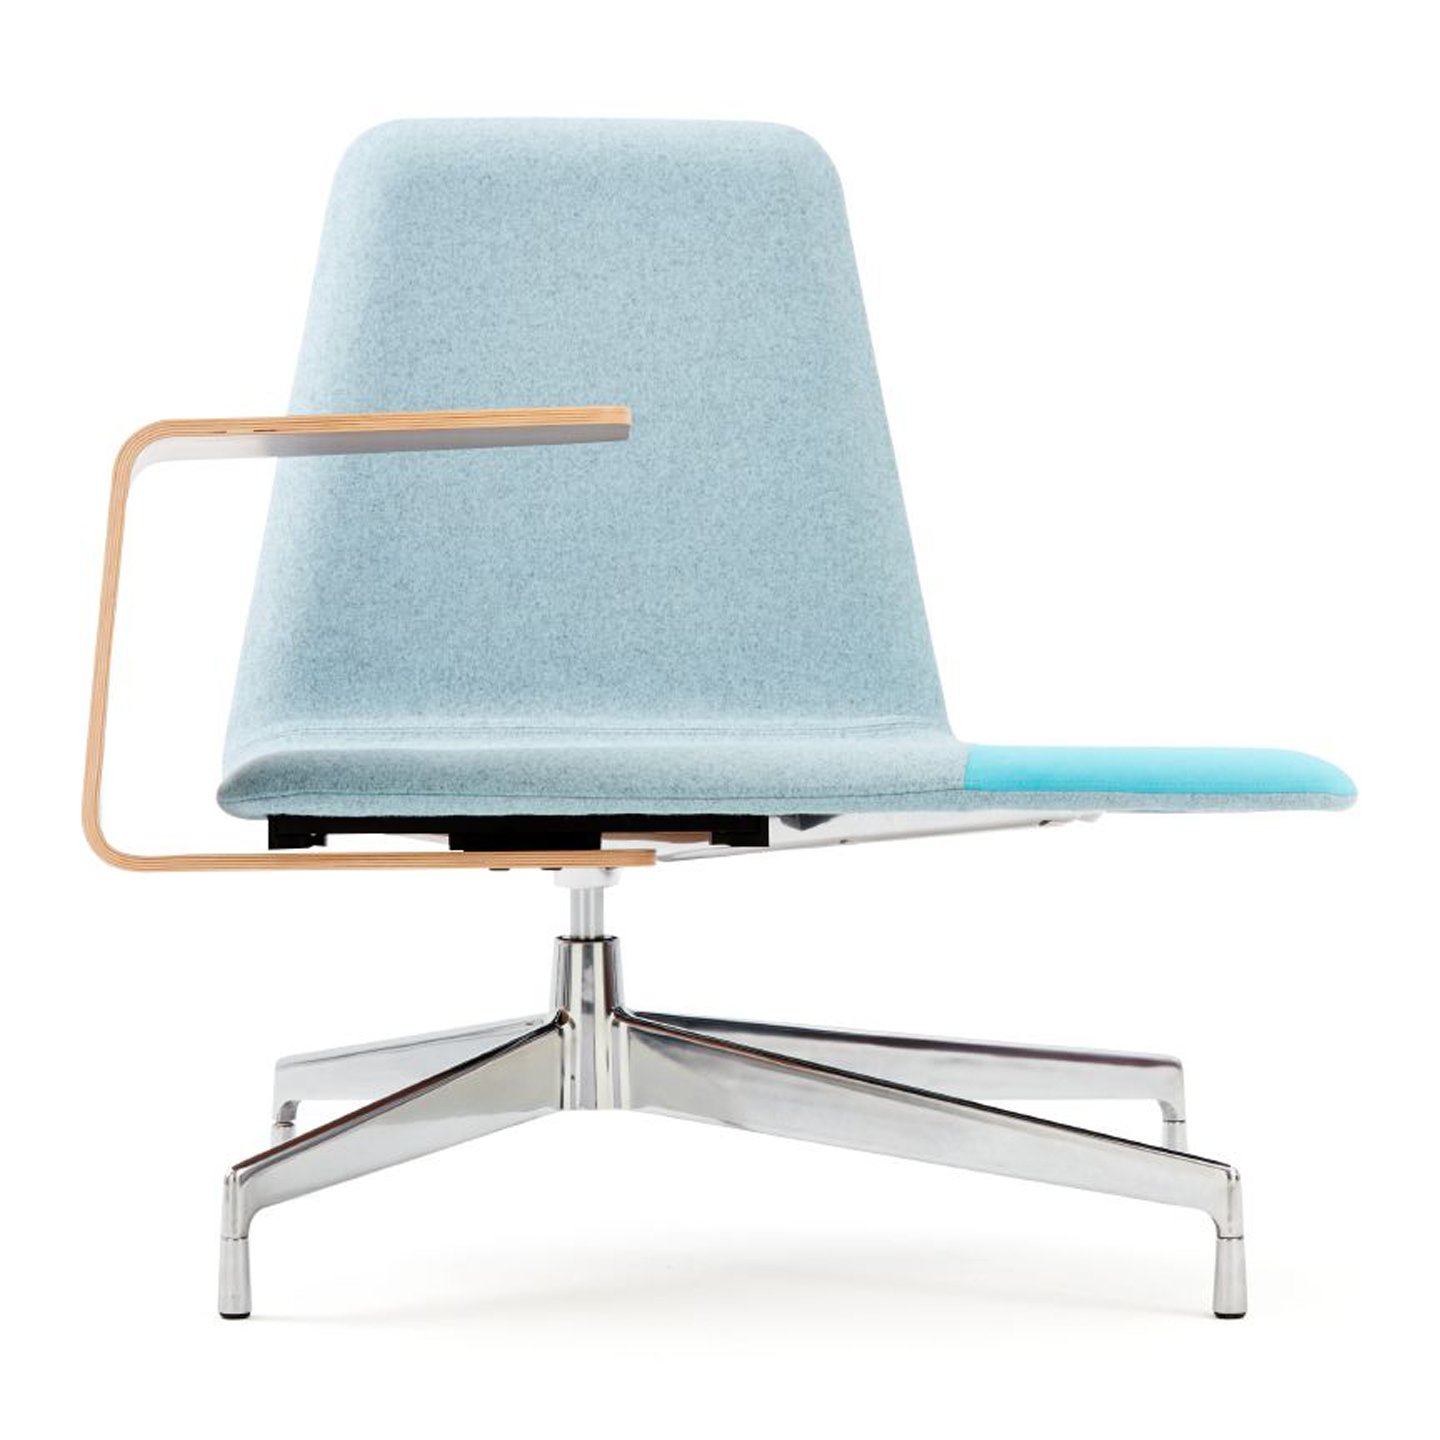 Haworth Harbor work lounge chair in blue with metal legs and attached wooden study support